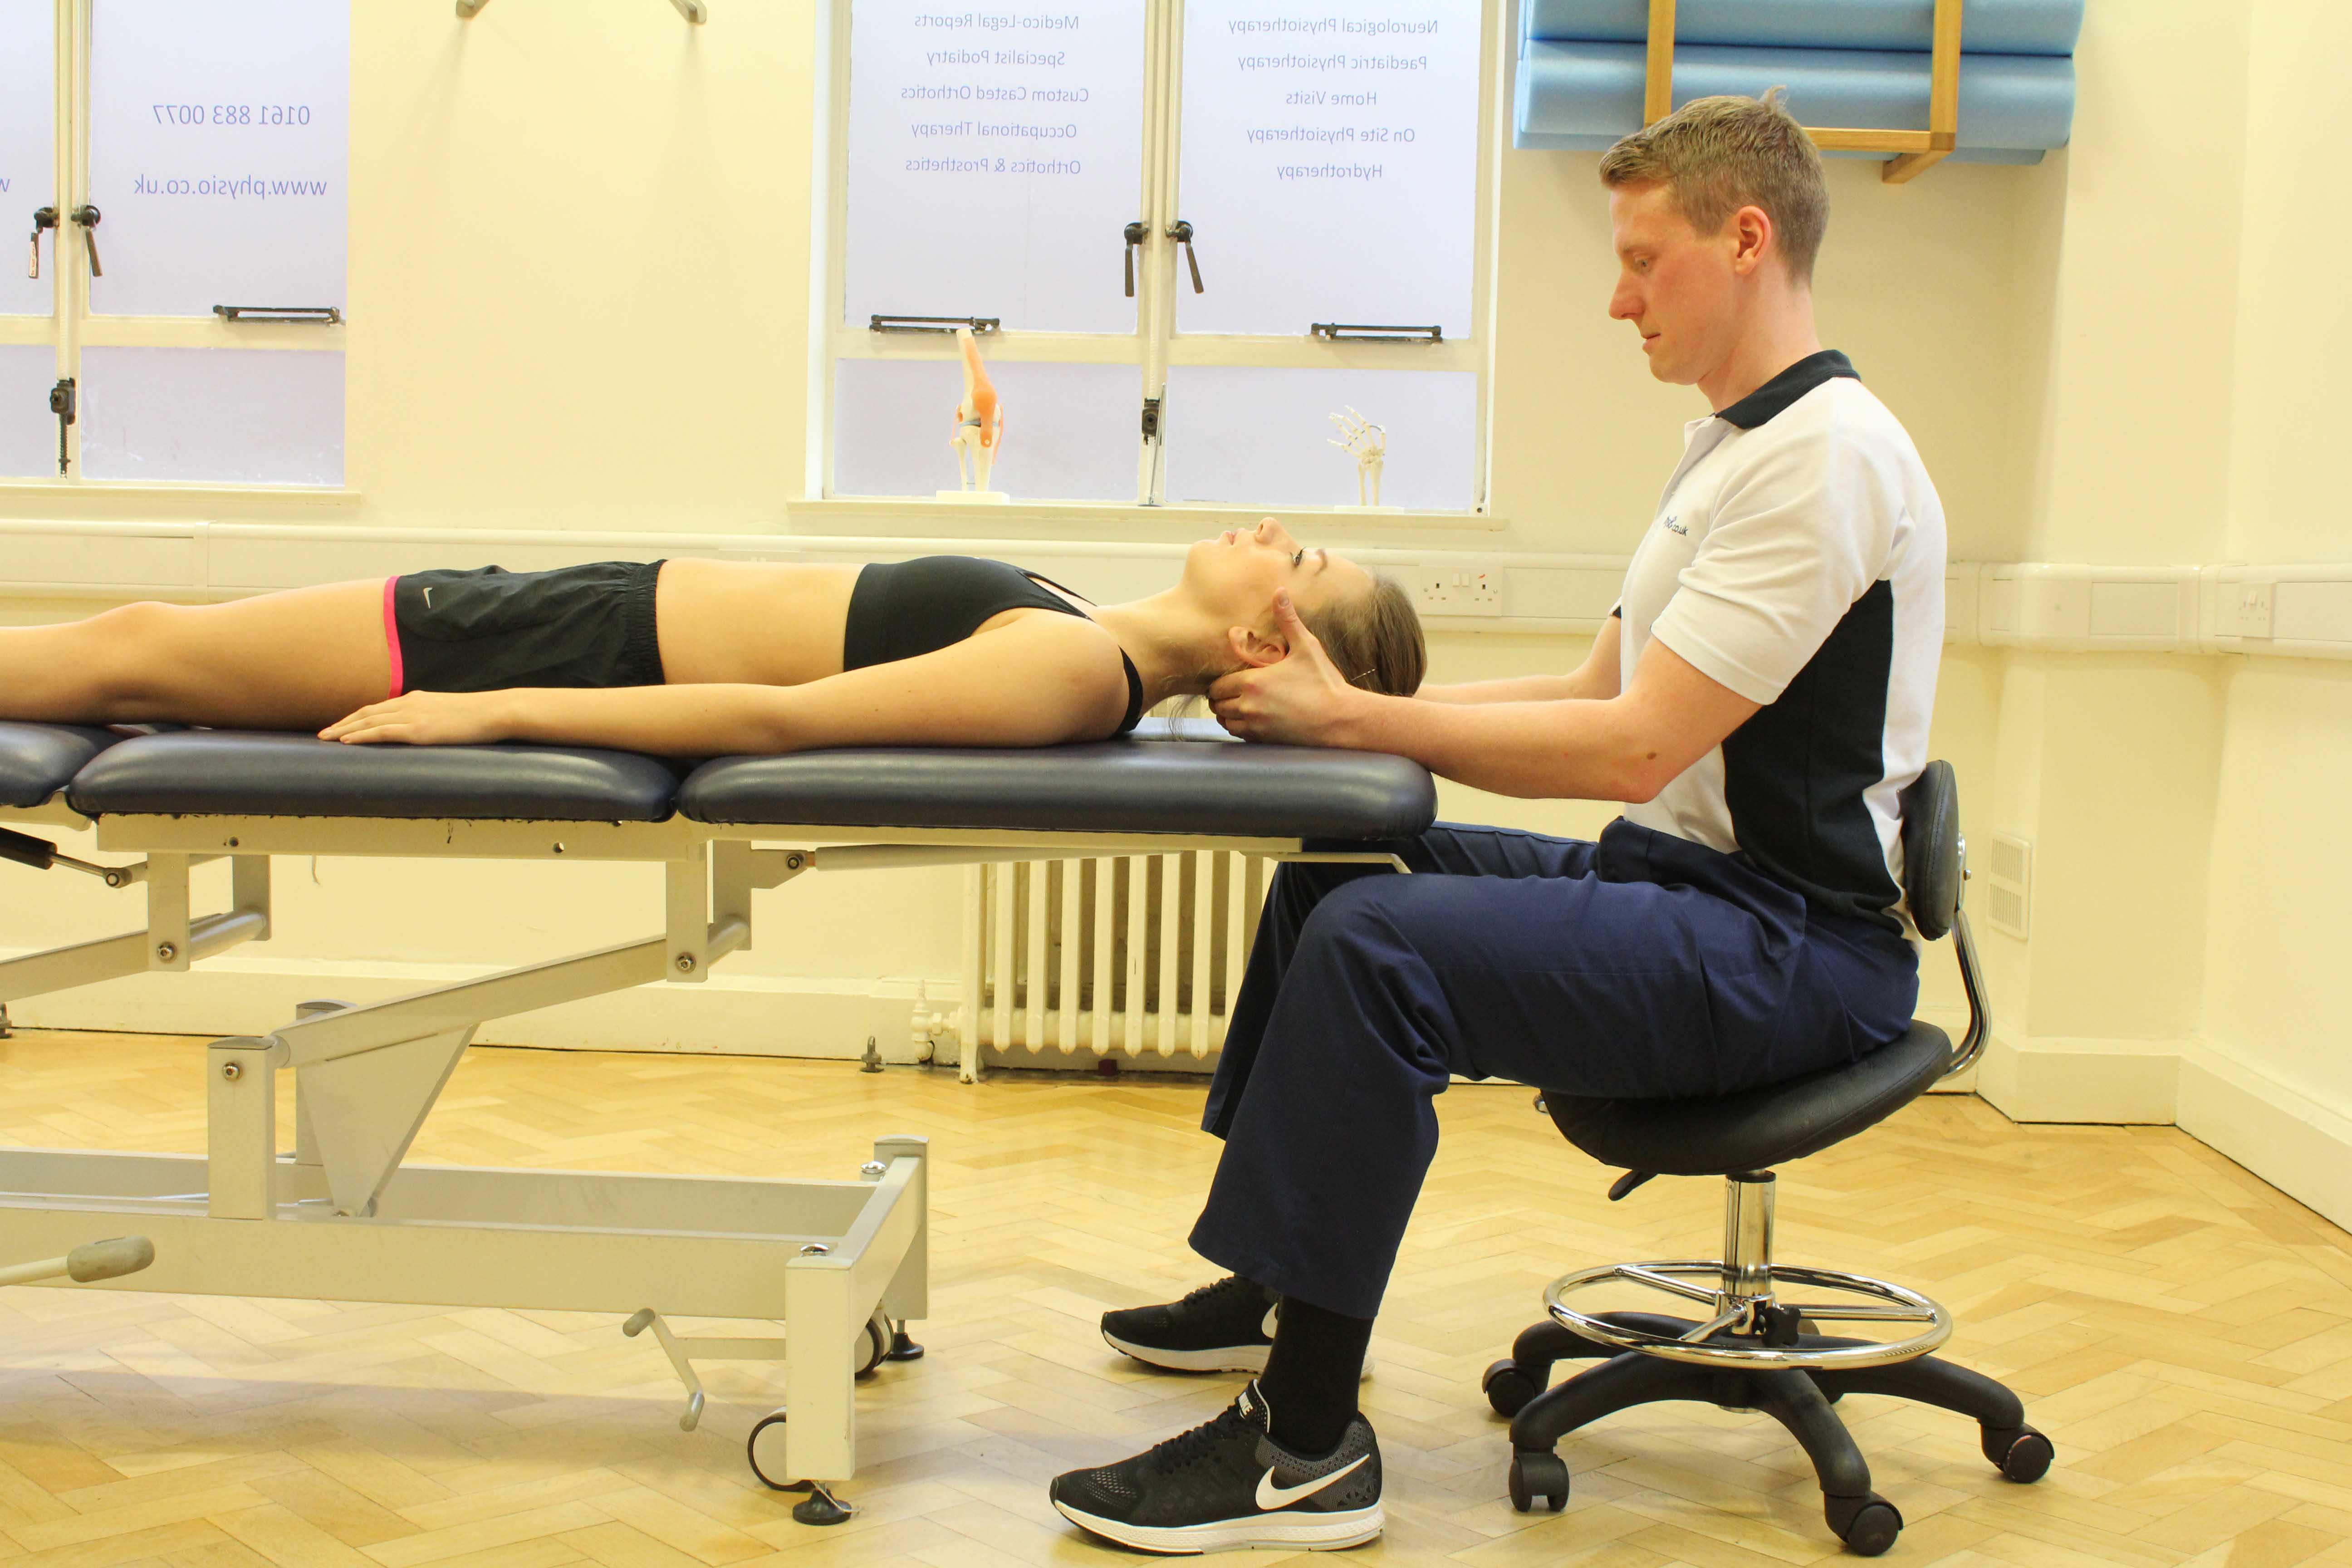 Mobilisations of the cervical vertebrea to reduce stiffness and any nerve impingement